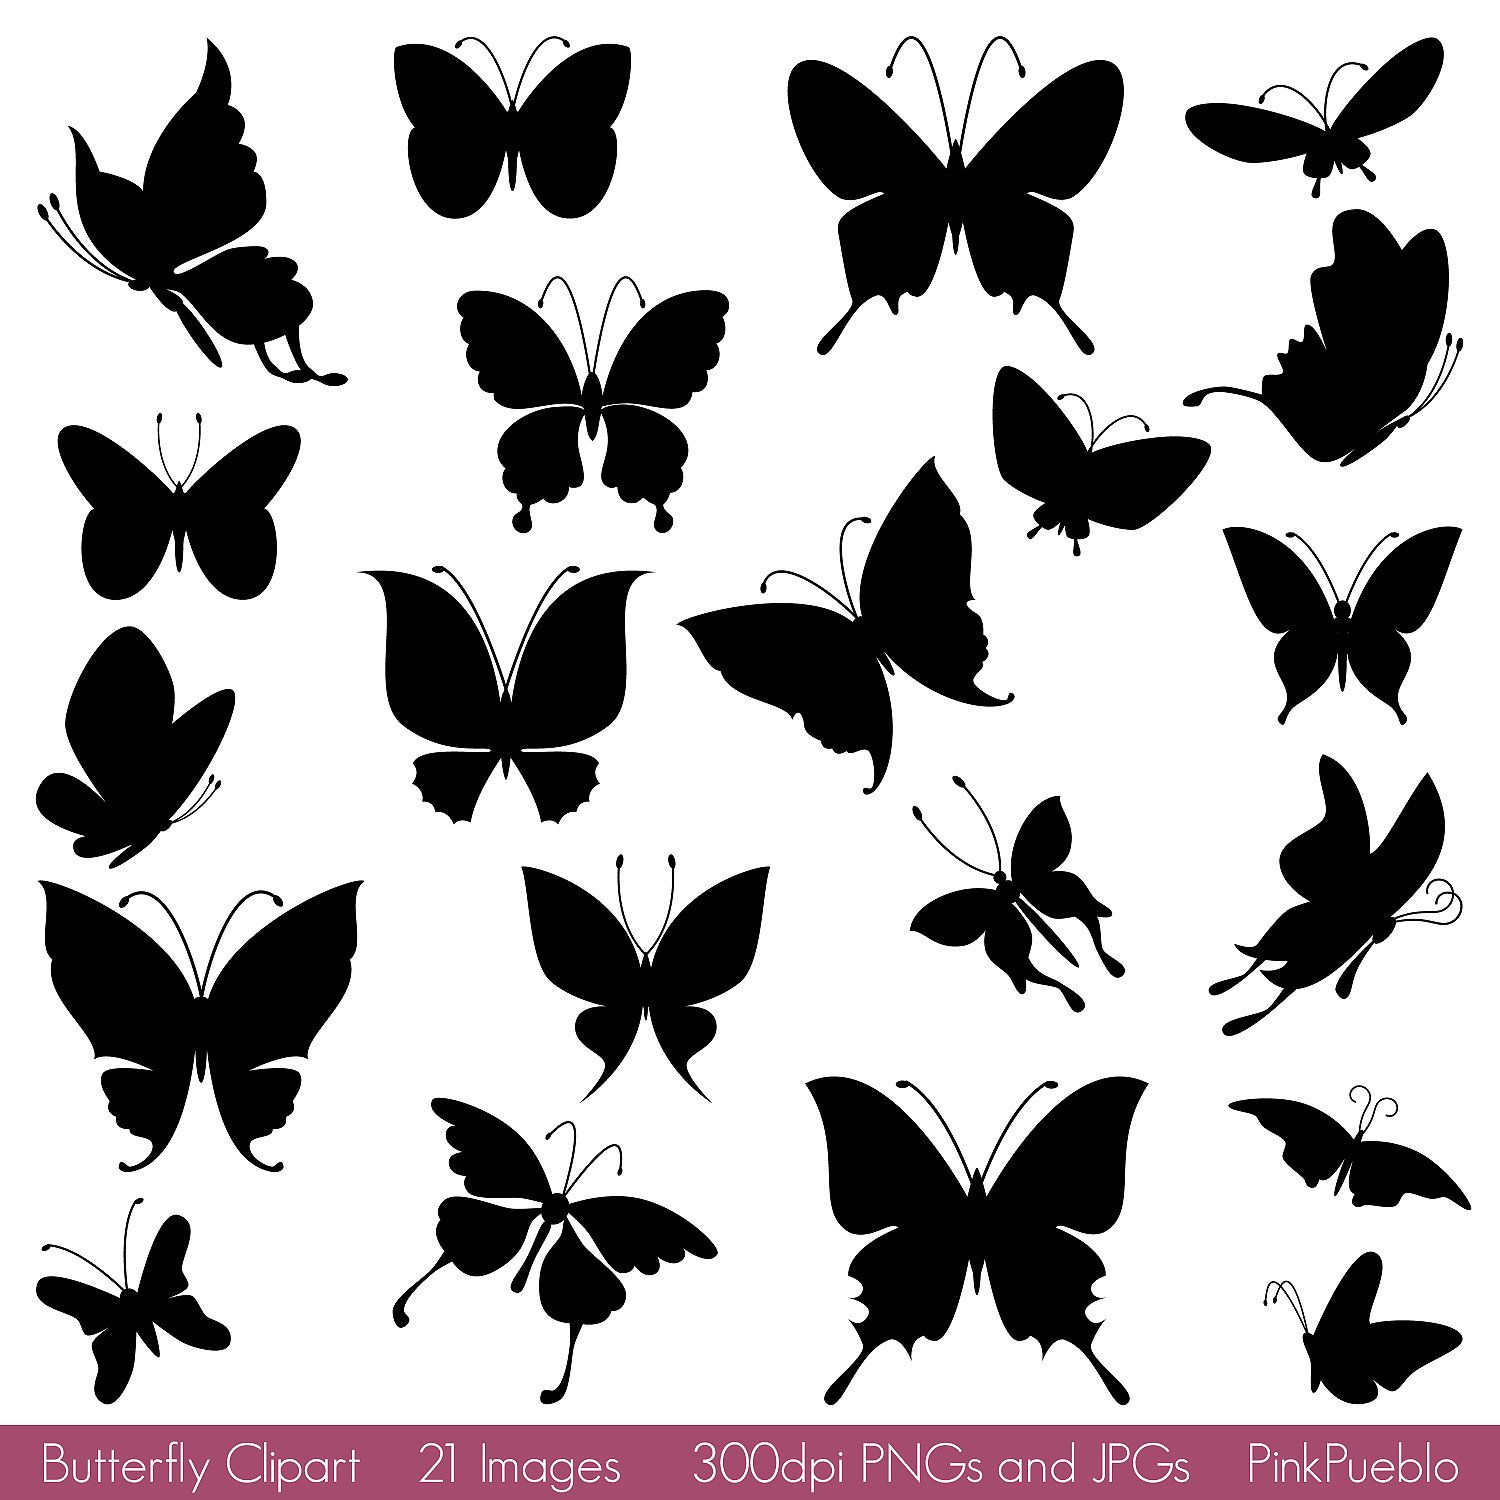 Butterfly Silhouettes Clipart Clip Art, Butterfly Clipart